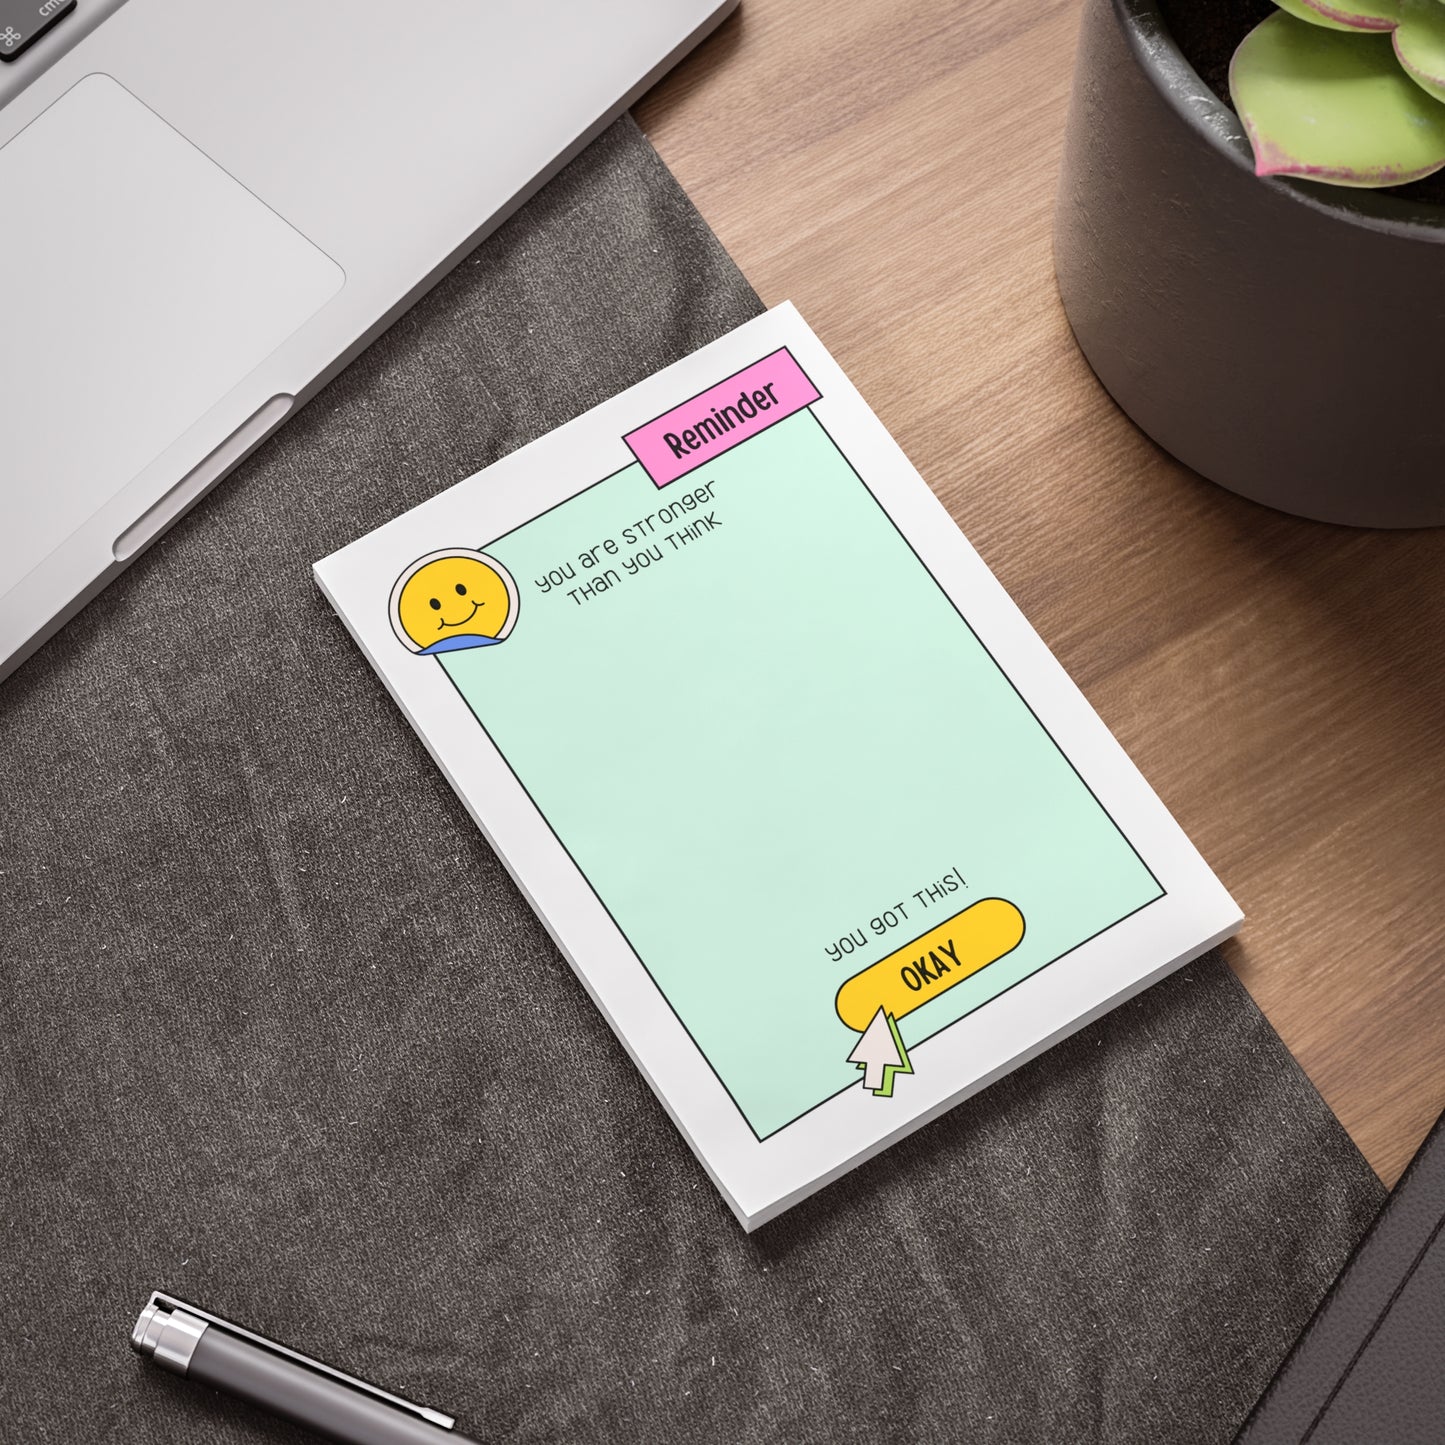 You Got This Post-it® Note Pads